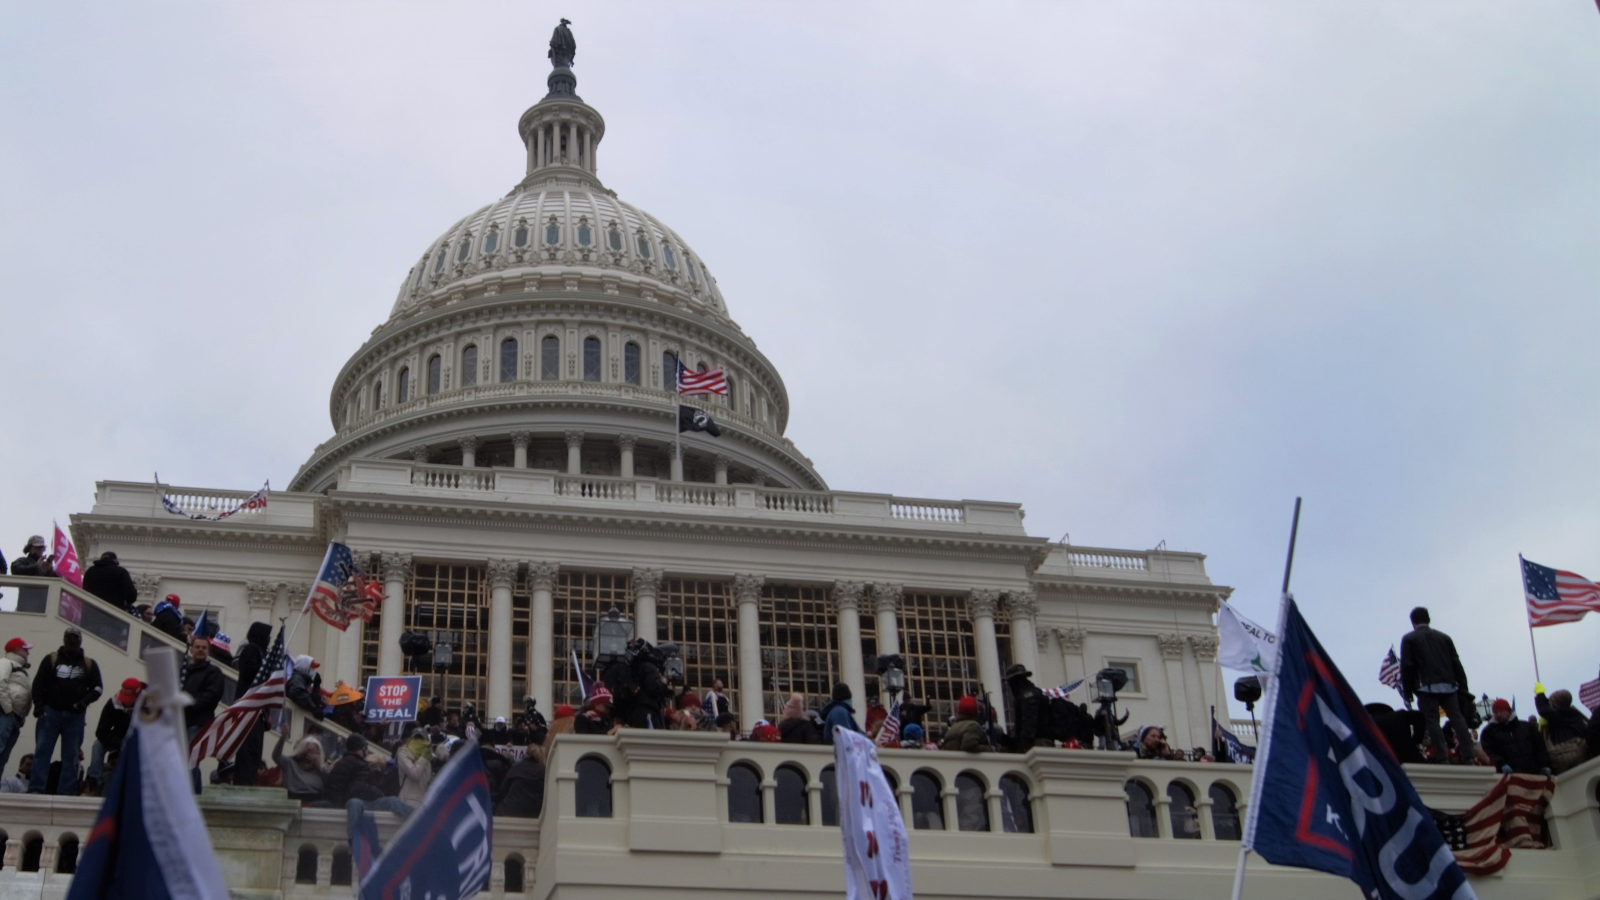 Protesters carrying &quot;Trump 2020&quot; crowd the steps to the U.S. Capitol building with the rotunda visible.